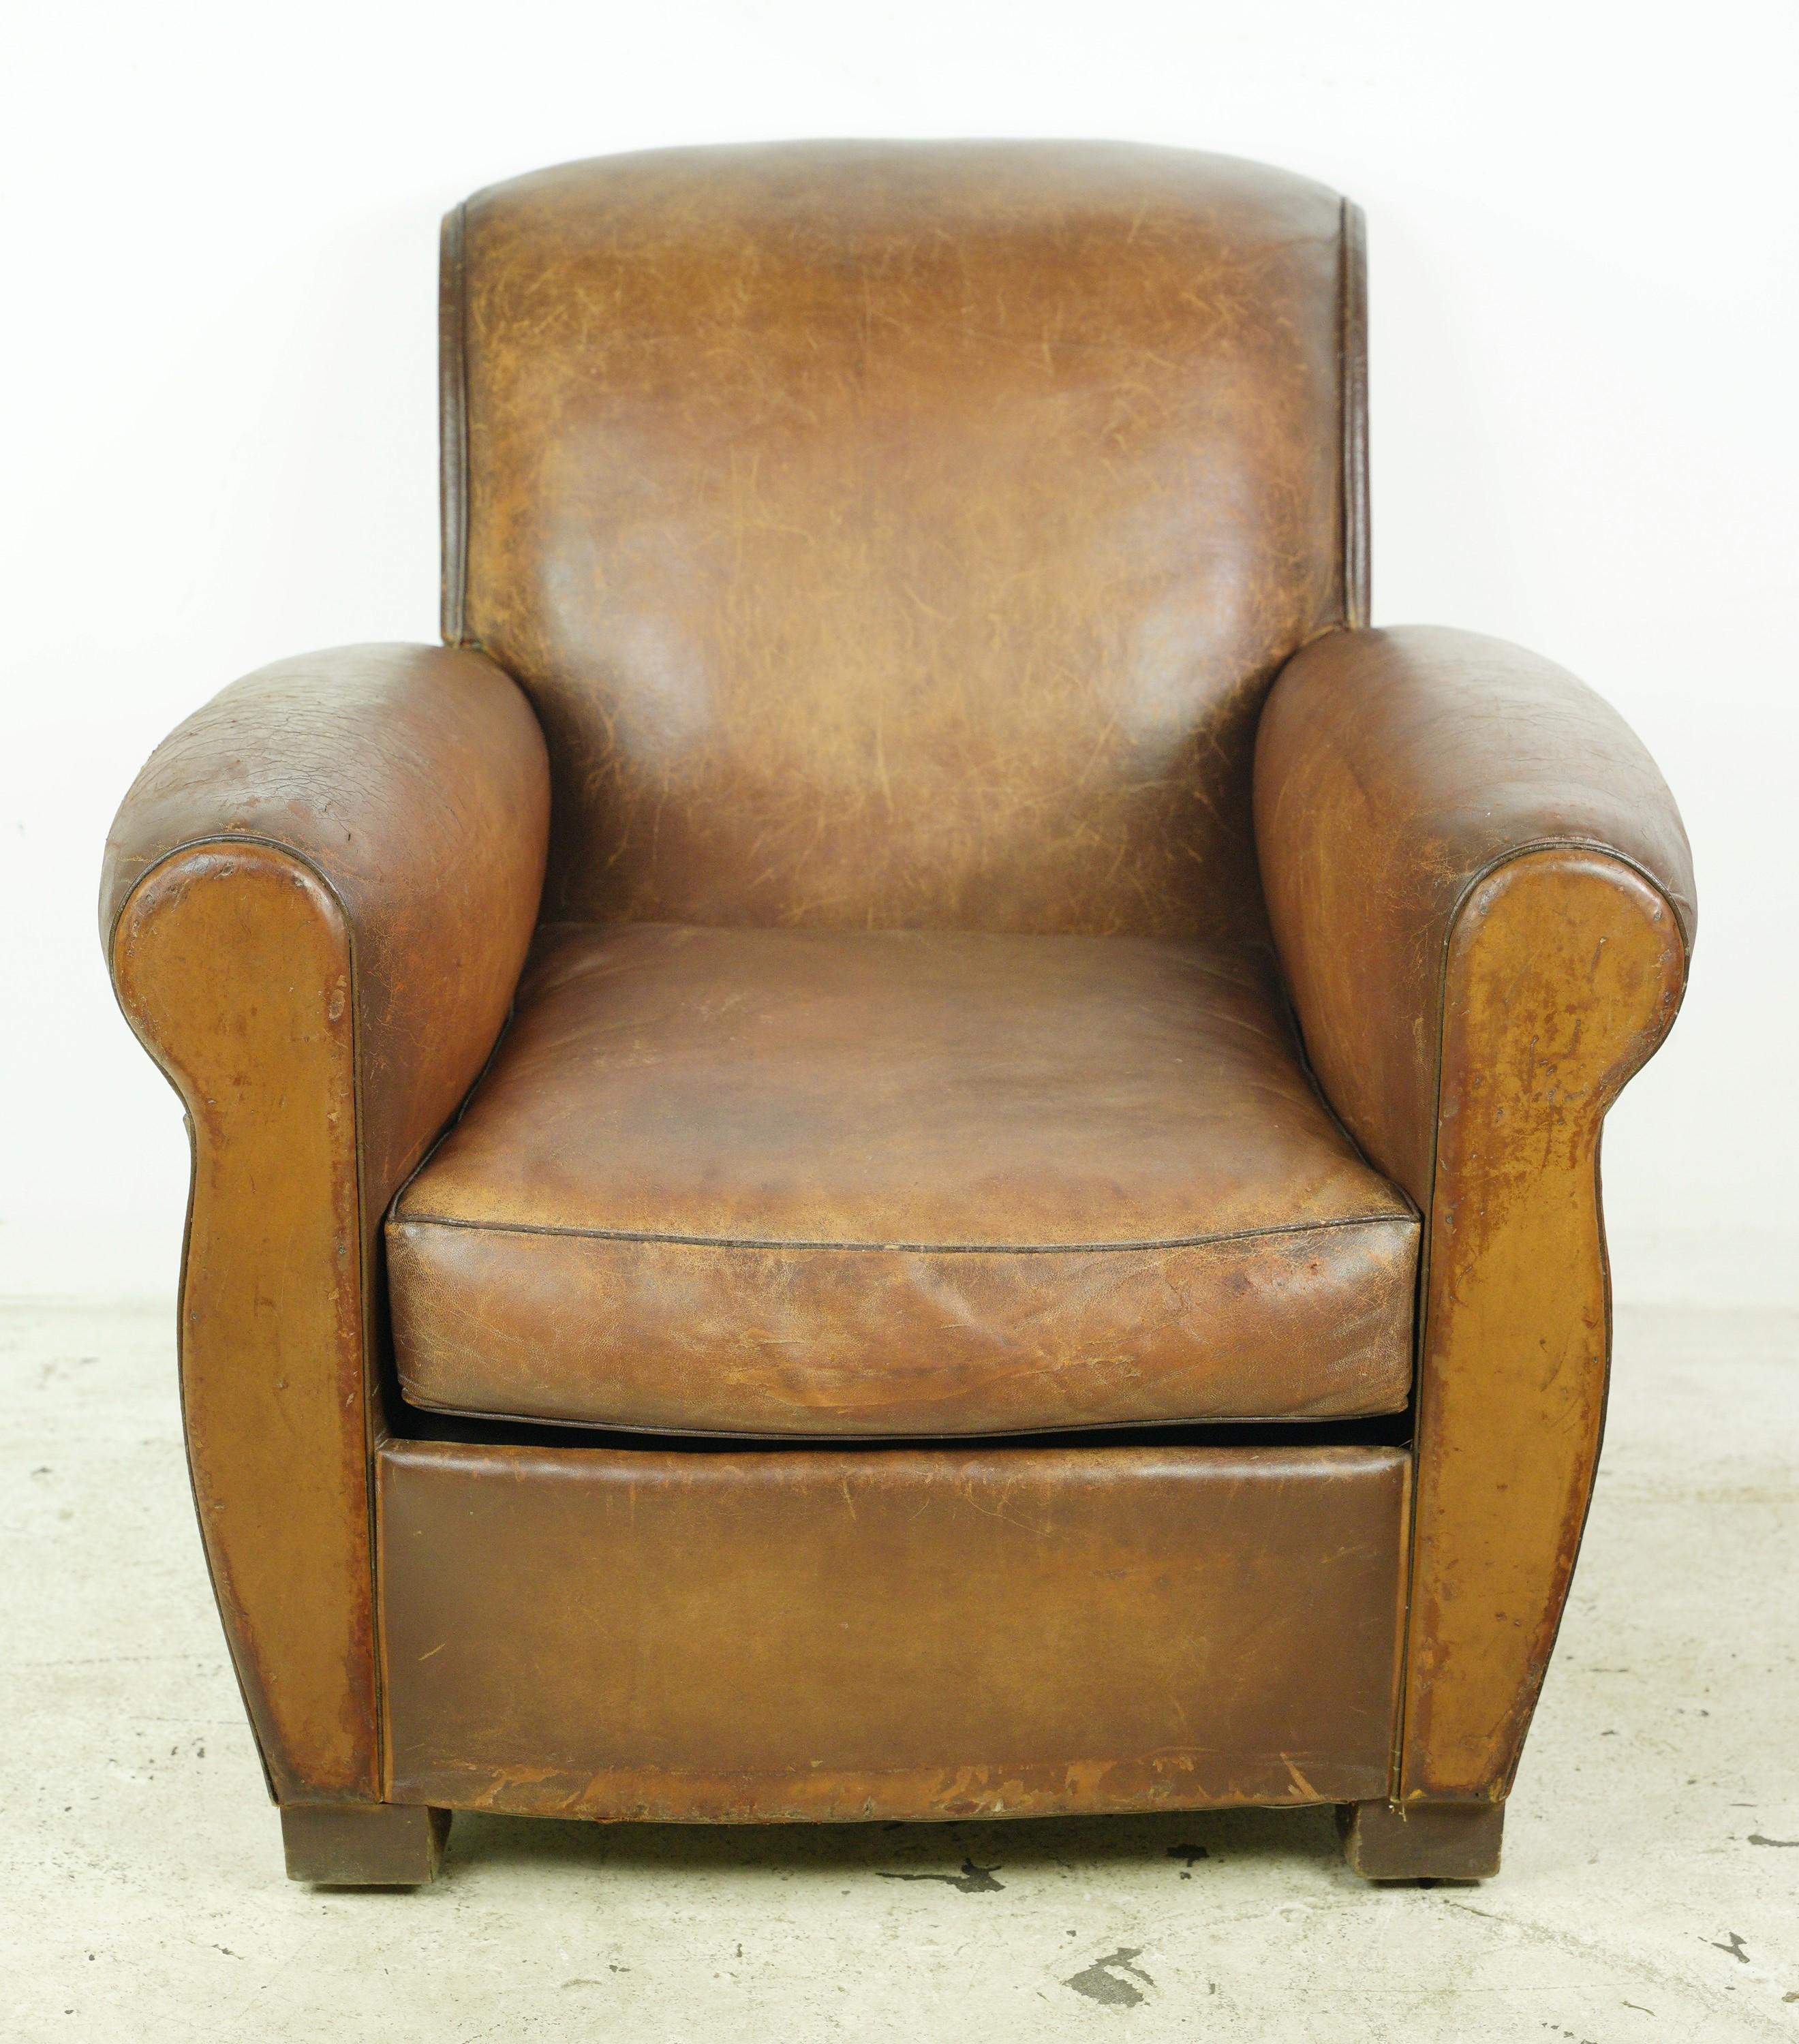 This European club chair upholstered in brown leather is adorned with steel studs, featuring wood feet. This chair combines the comfort of leather with the classic appeal of steel studs and wood details, creating a stylish and inviting seating